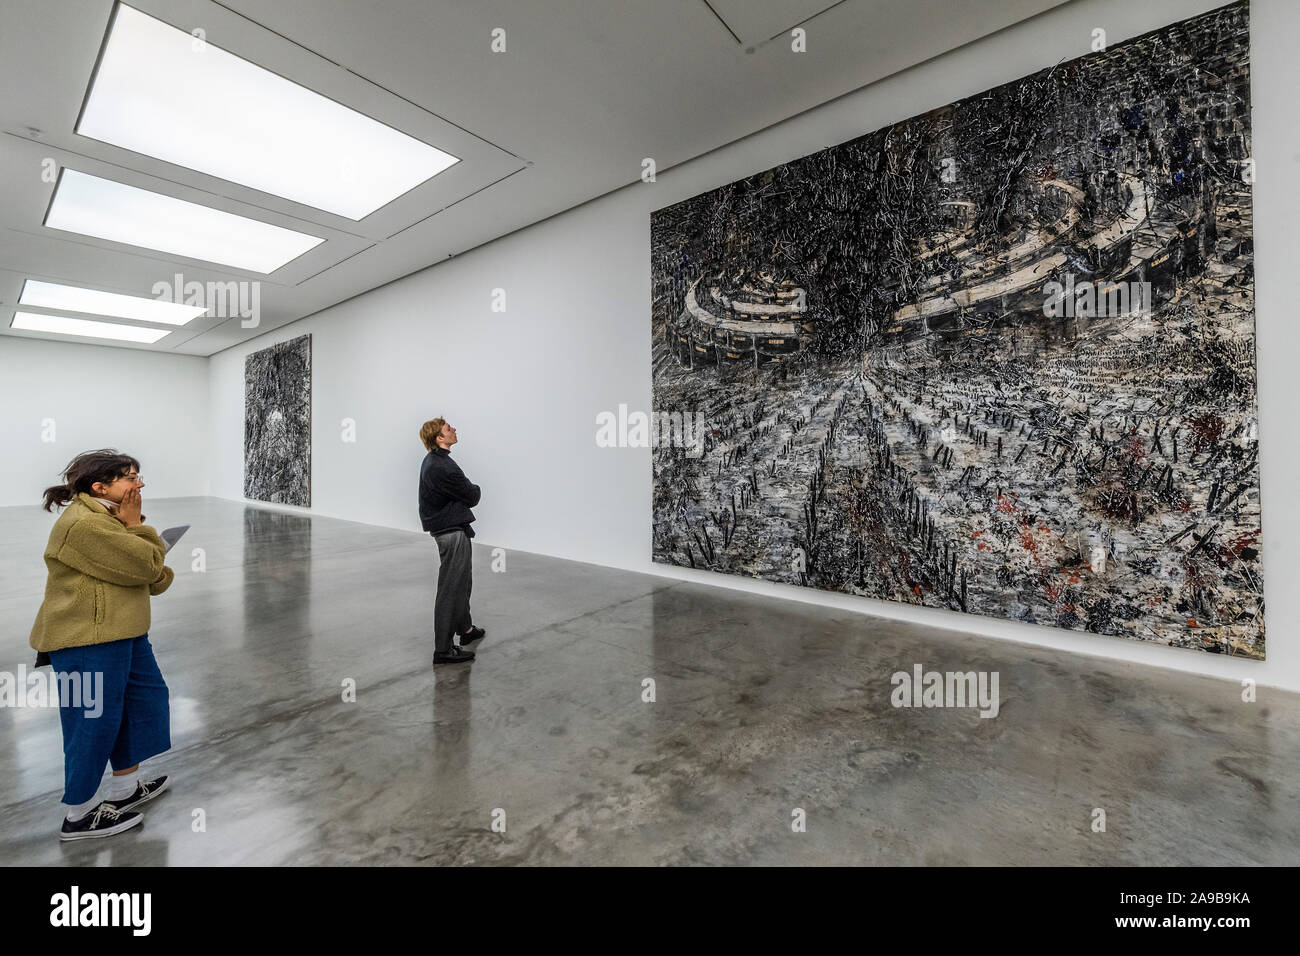 White Cube Bermondsey, London, UK. 14th Nov, 2019. Die Lebenden und die Totem, 2017-2019 - Stringtheorie. Nornen (Urd, Verdandi, Skuld), Runen and Gordischer Knoten', a major solo show by Anselm Kiefer. Spanning all four spaces and the corridor of the White Cube Bermondsey gallery, the exhibition encompasses large-scale painting and installation. Credit: Guy Bell/Alamy Live News Stock Photo